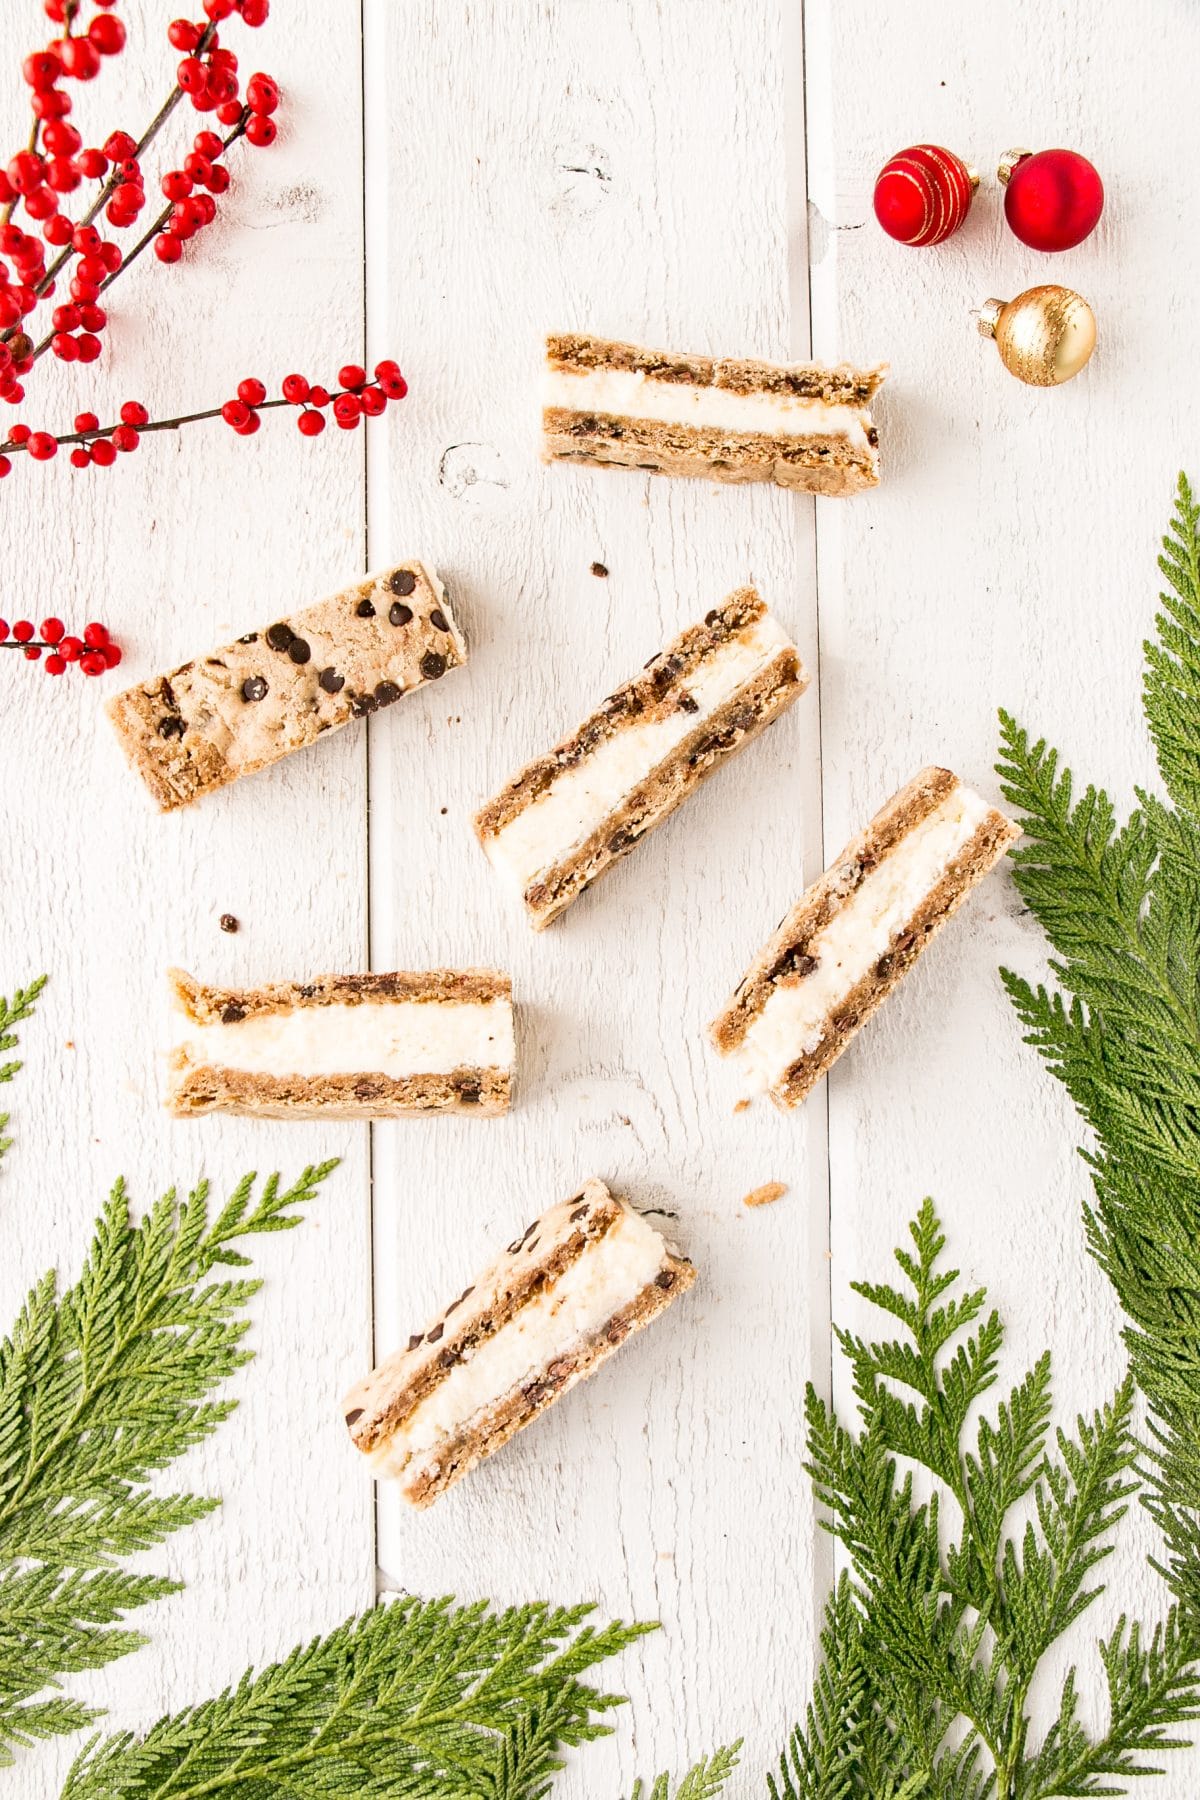 Milk and Cookie Bars (for Santa!) are easy to whip up and set a tradition on Christmas Eve. #ad #qualitymilk #christmas #milkandcookies